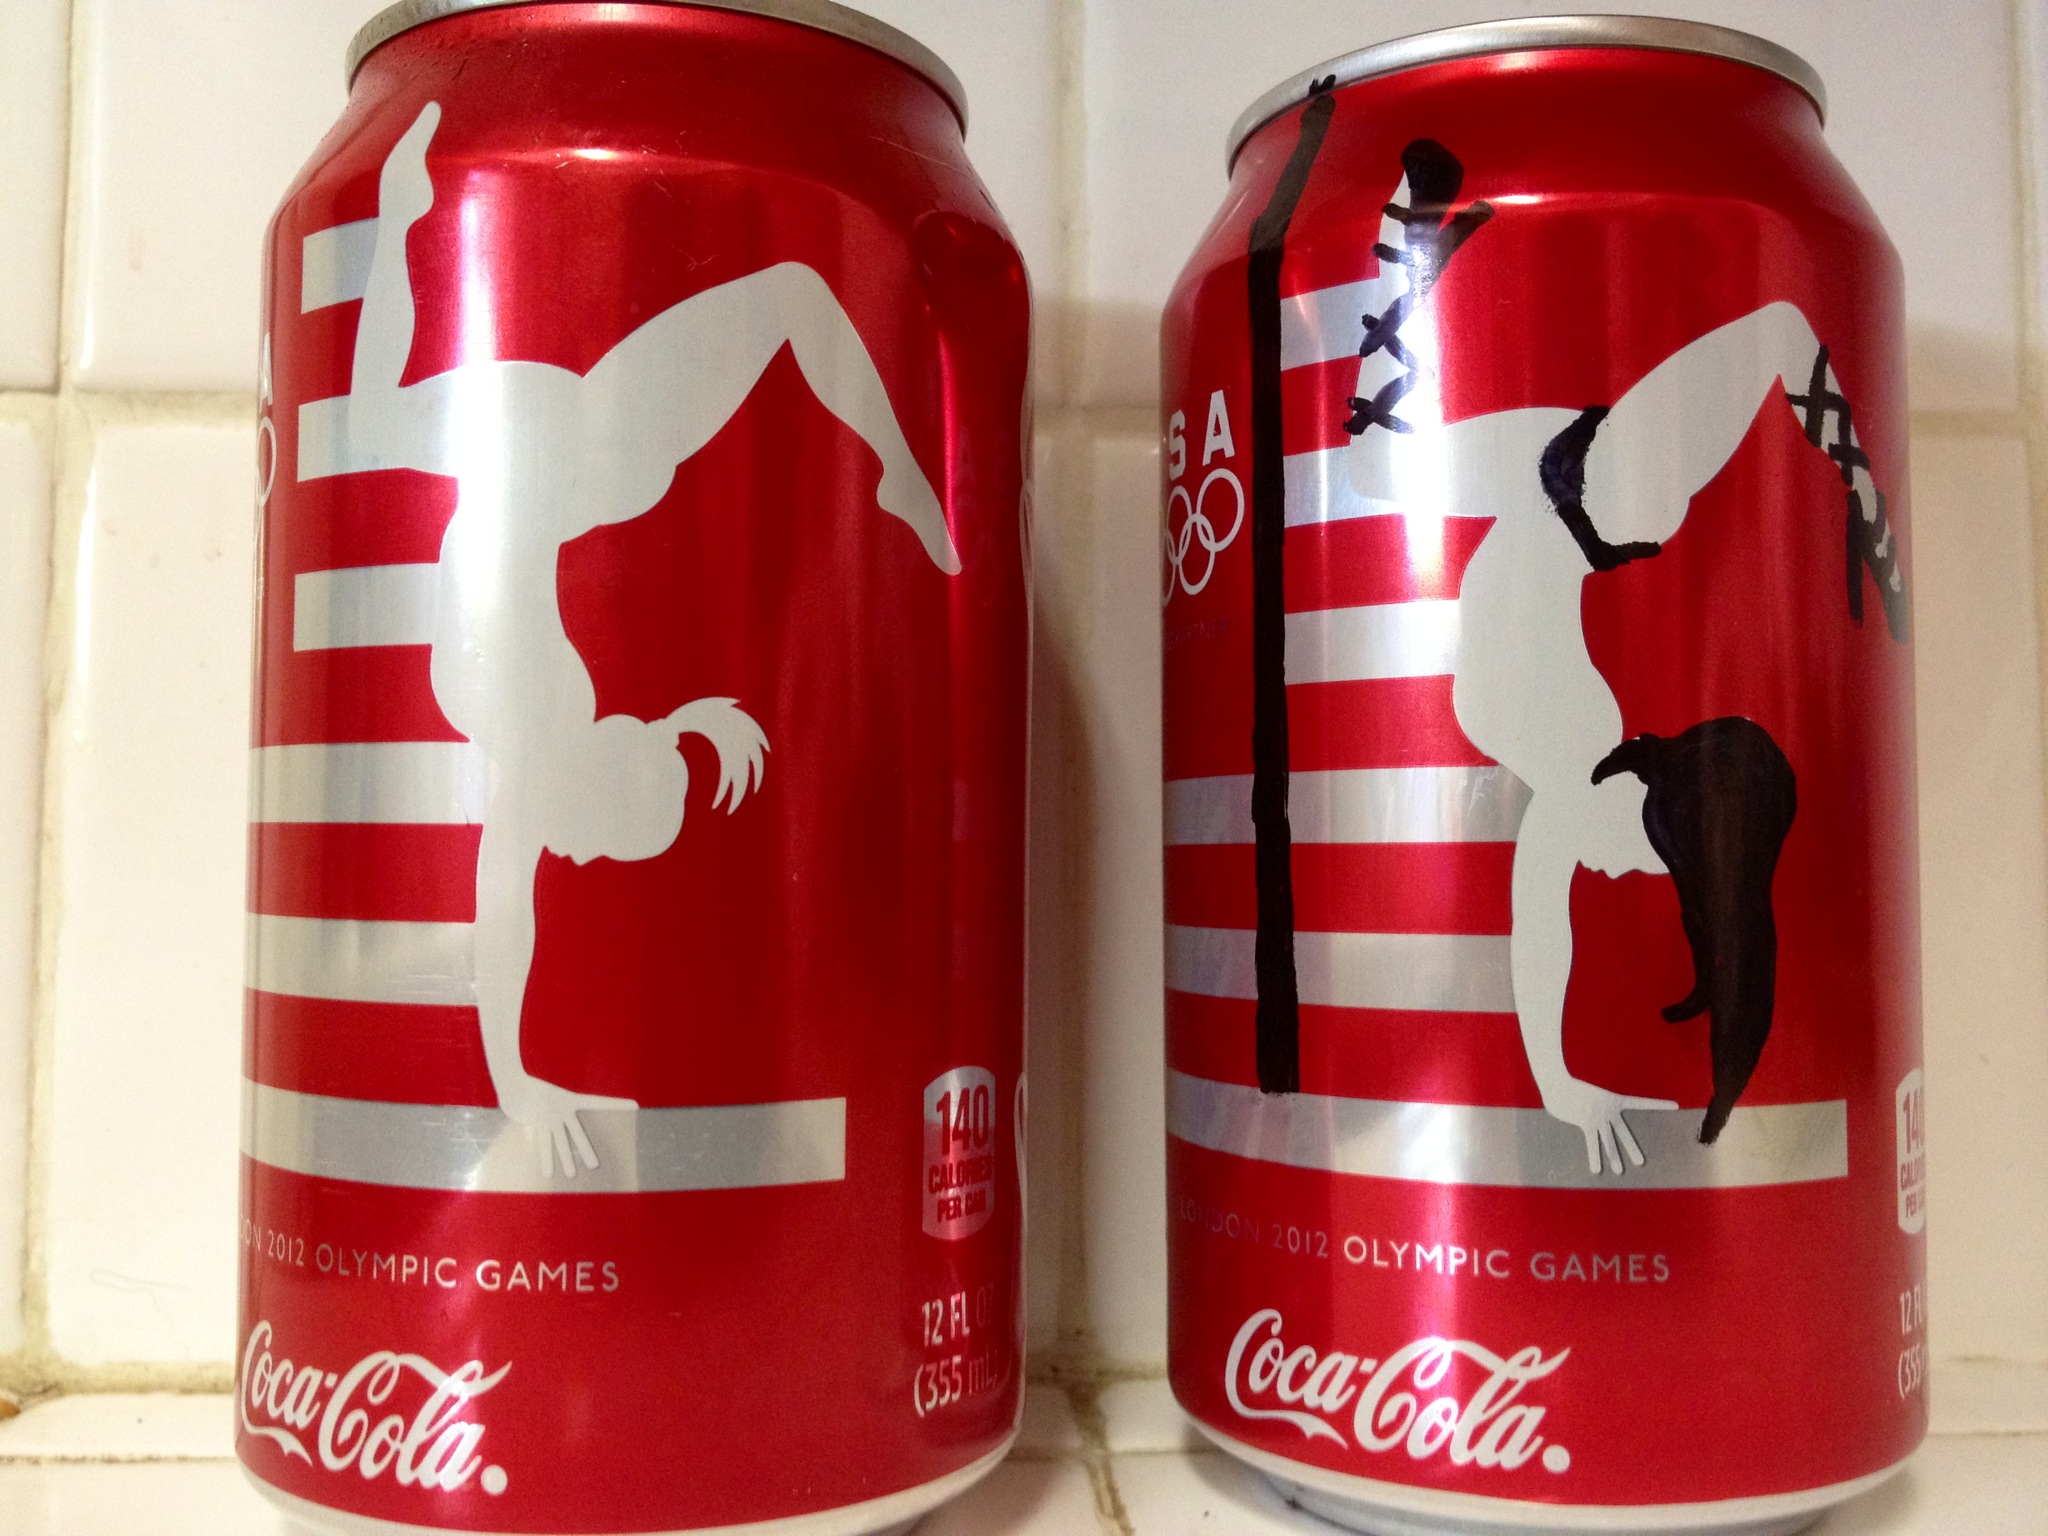 funny coca cola can - 2012 Olympic Games 012 Olympic Games 6cu .